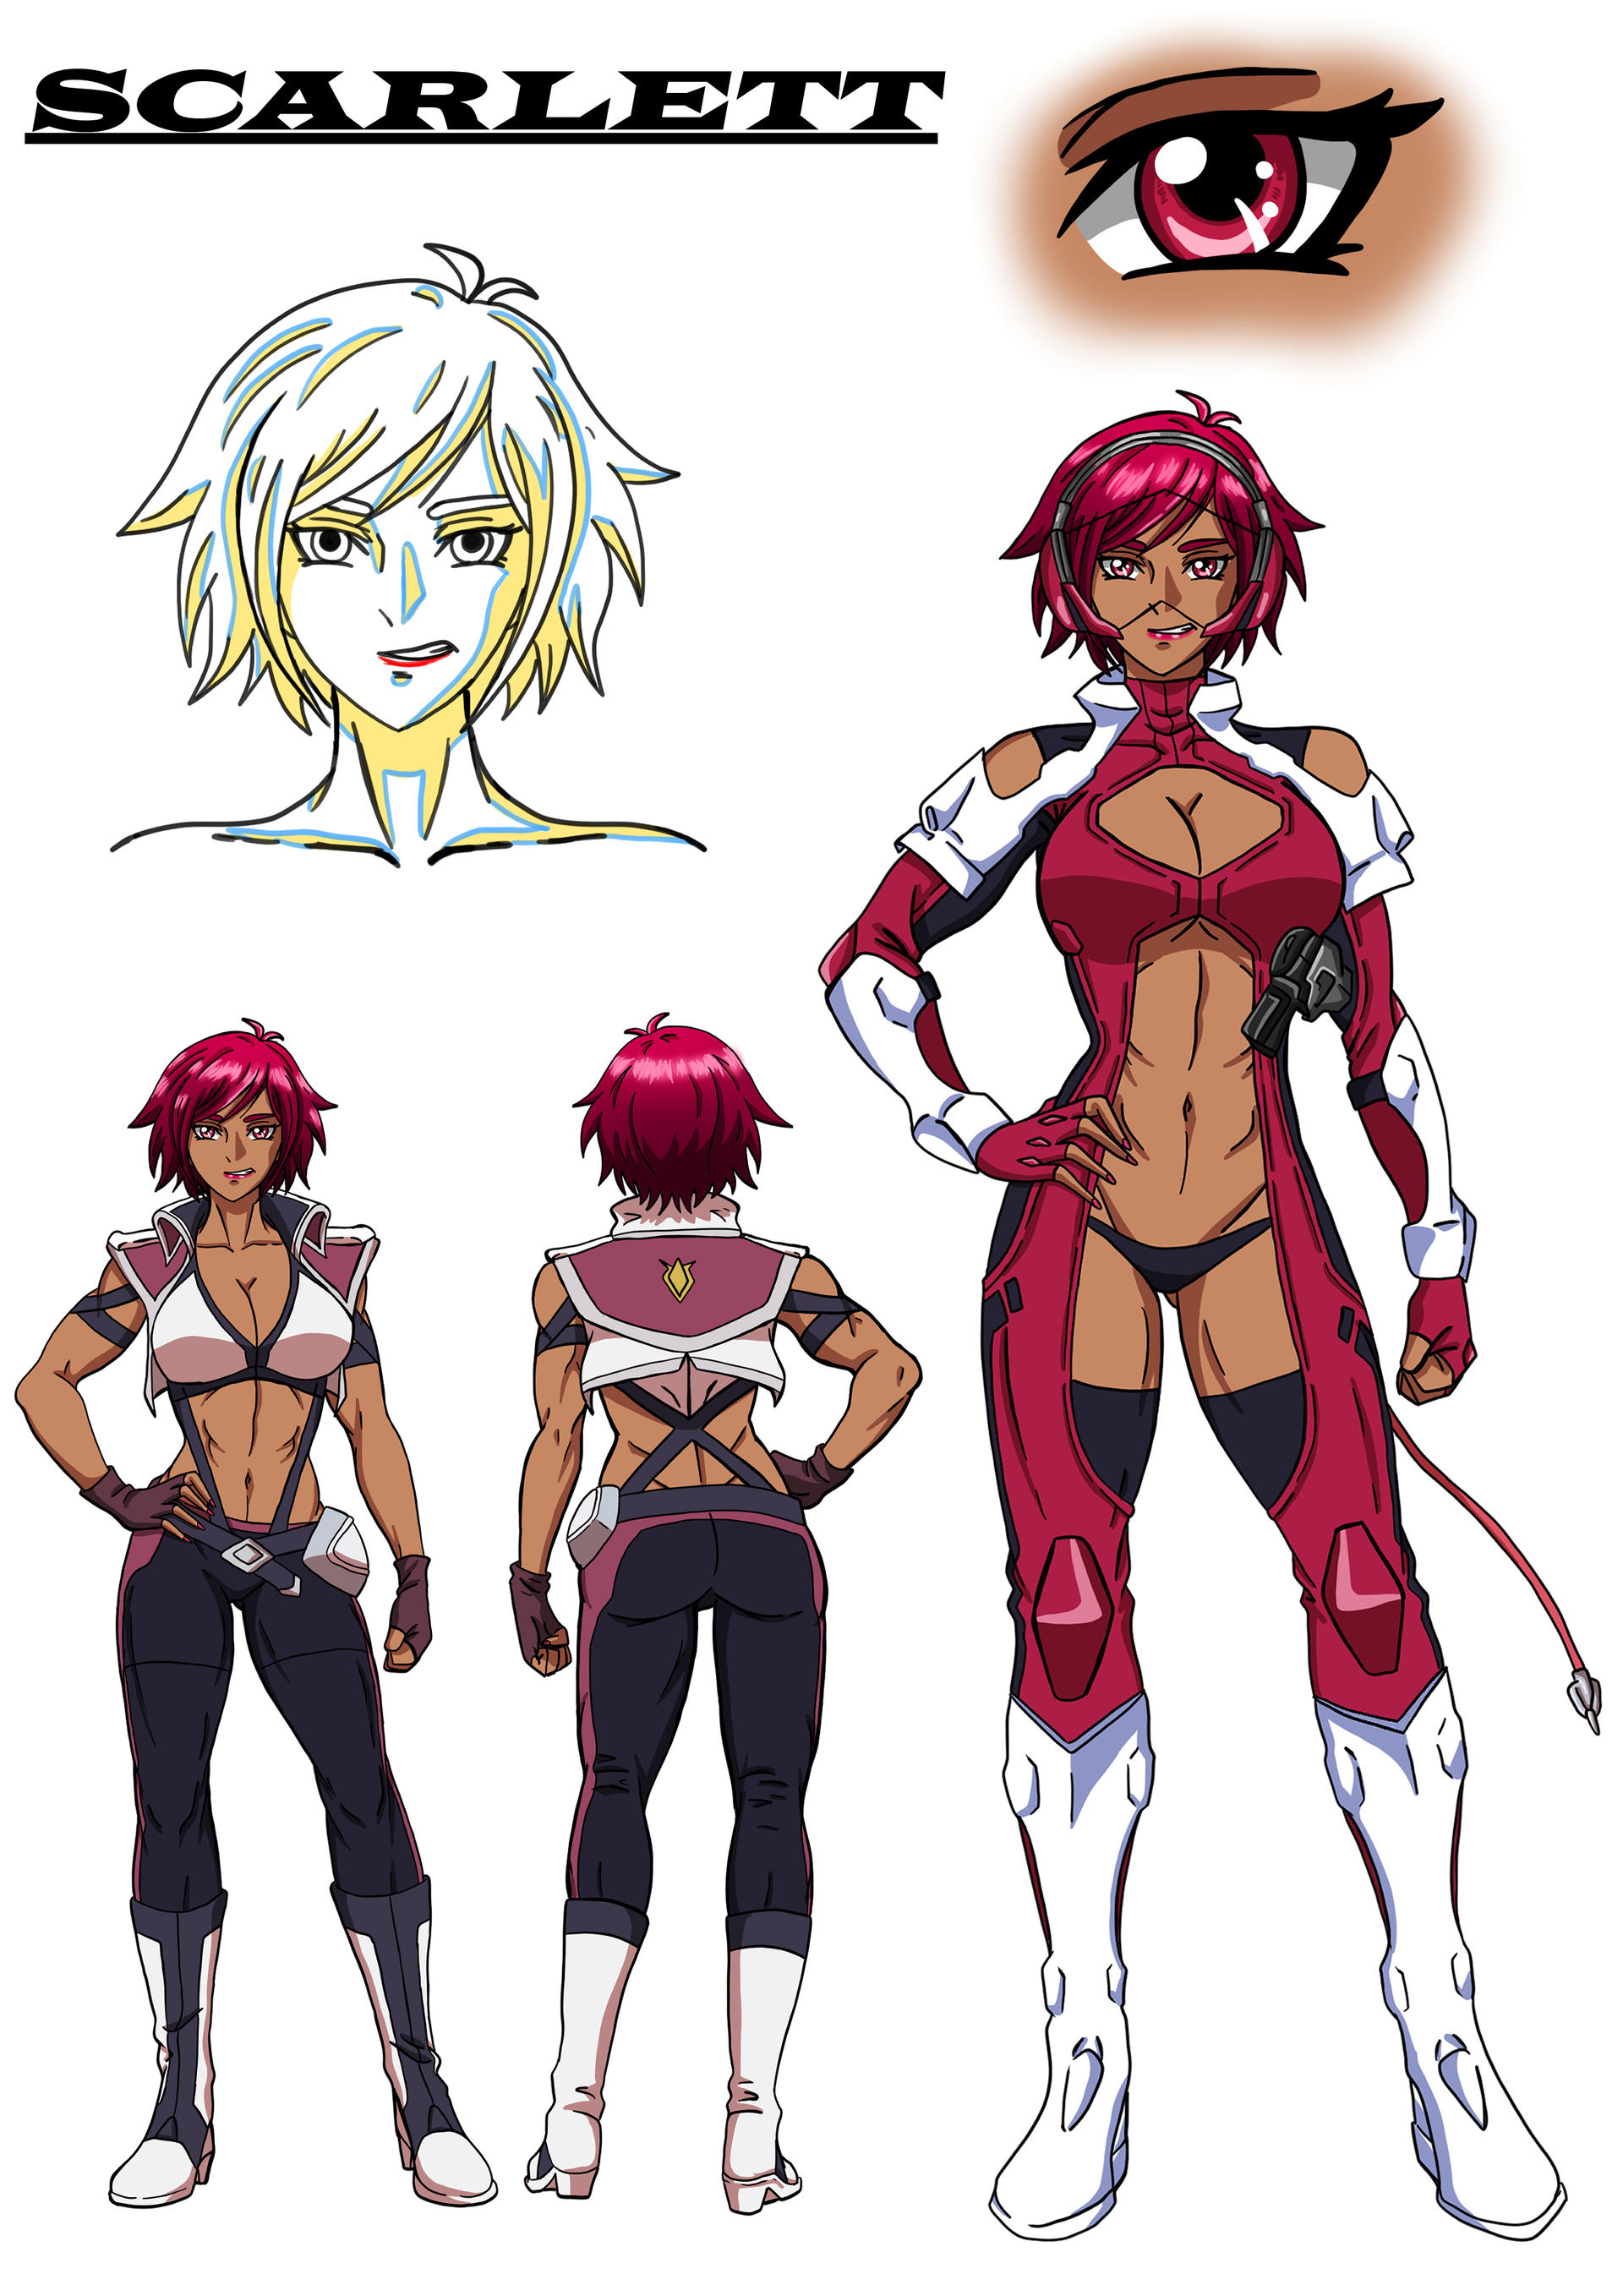 Cross Ange The Glitch In The System Scarlett By Raggylad98 On Deviantart